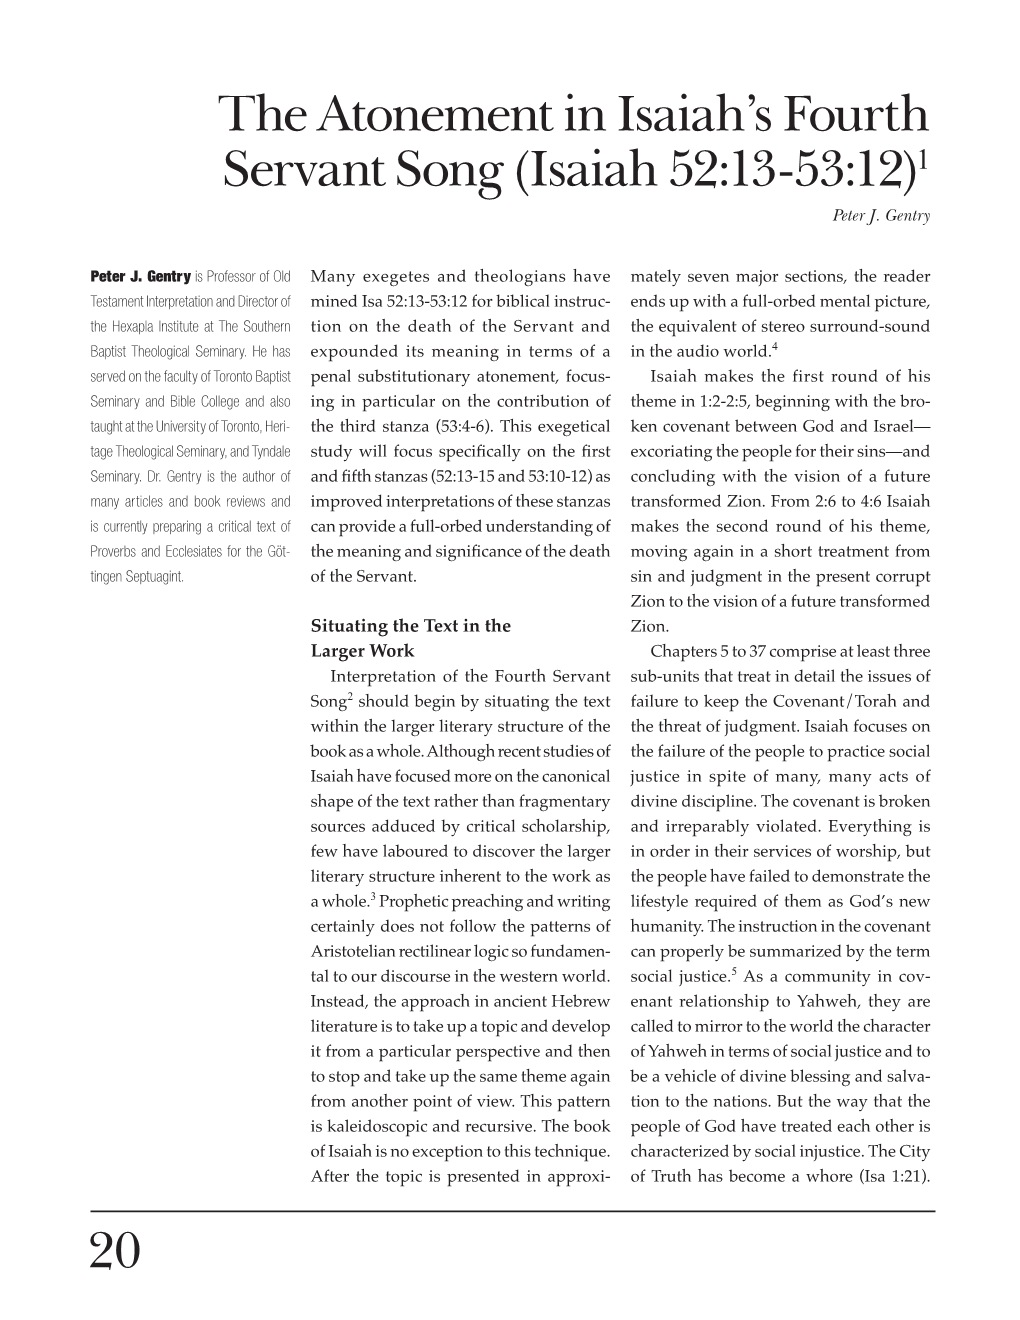 The Atonement in Isaiah's Fourth Servant Song